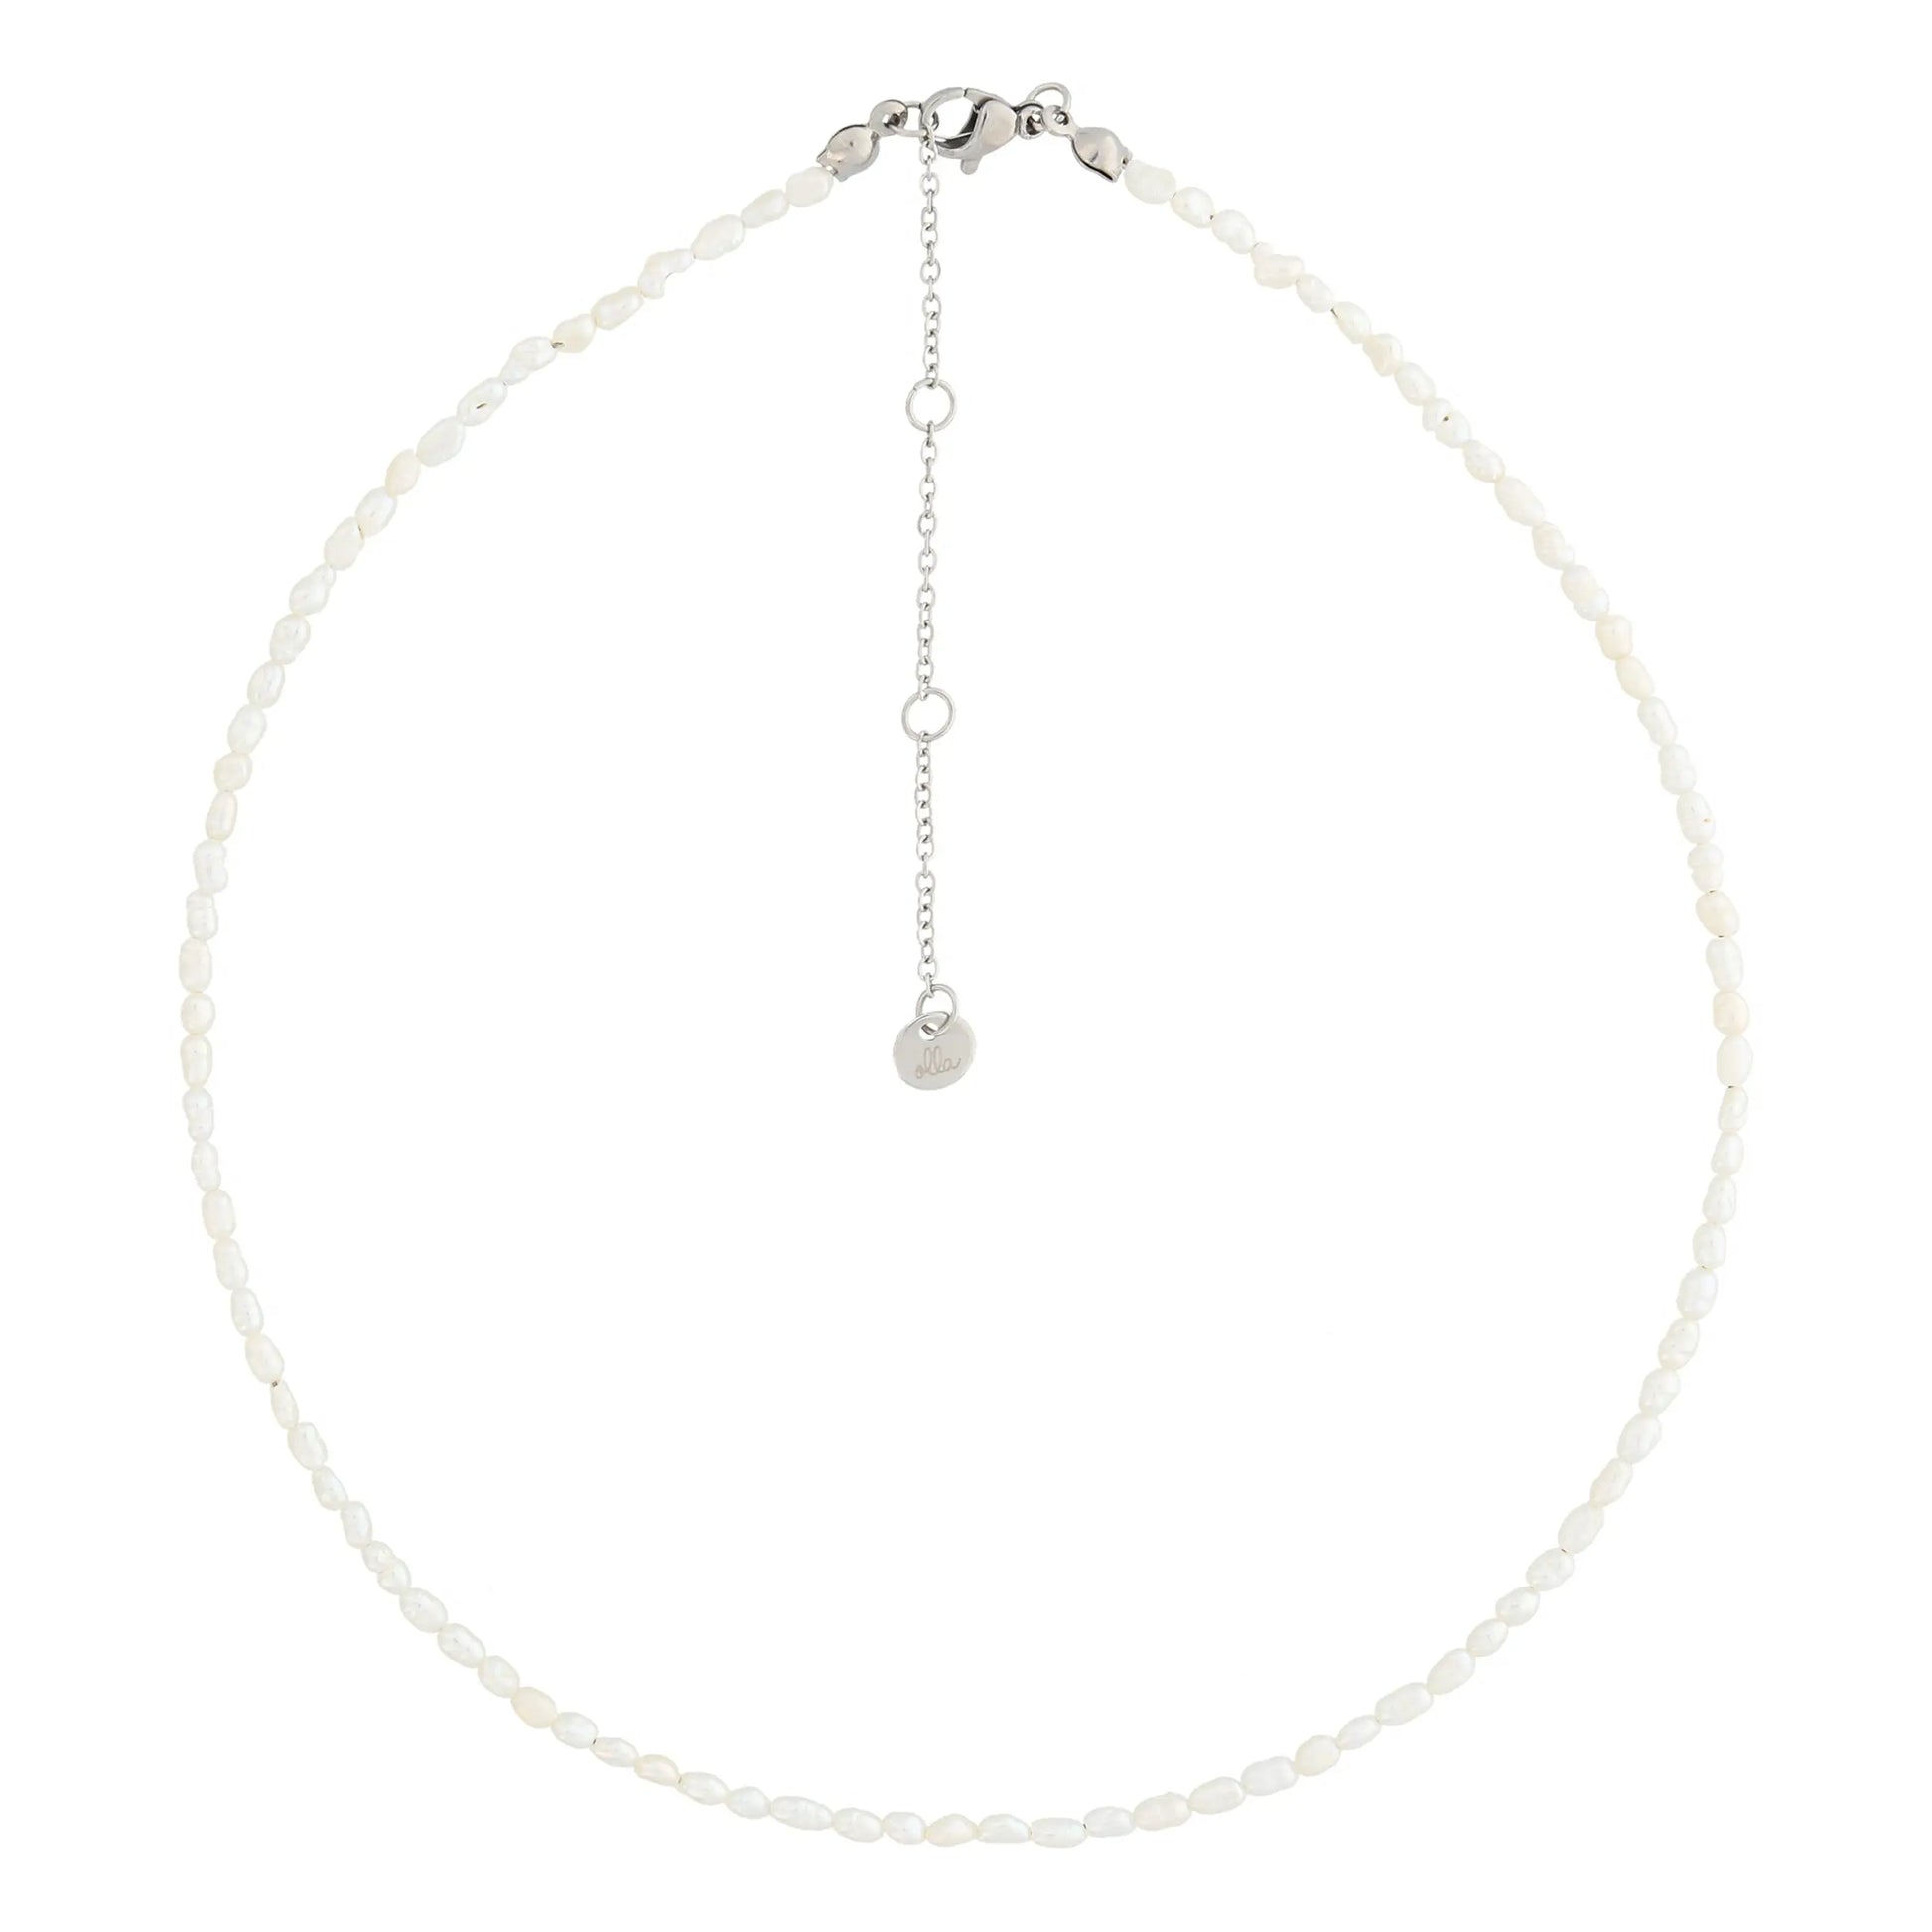 Necklace with freshwater pearls and silver chain, featuring a close-up of a silver tag. Stainless steel material, allergy-free, packaged for gifting. Length: 38 cm + 5 cm extension. Pearl size: 2-3 mm.